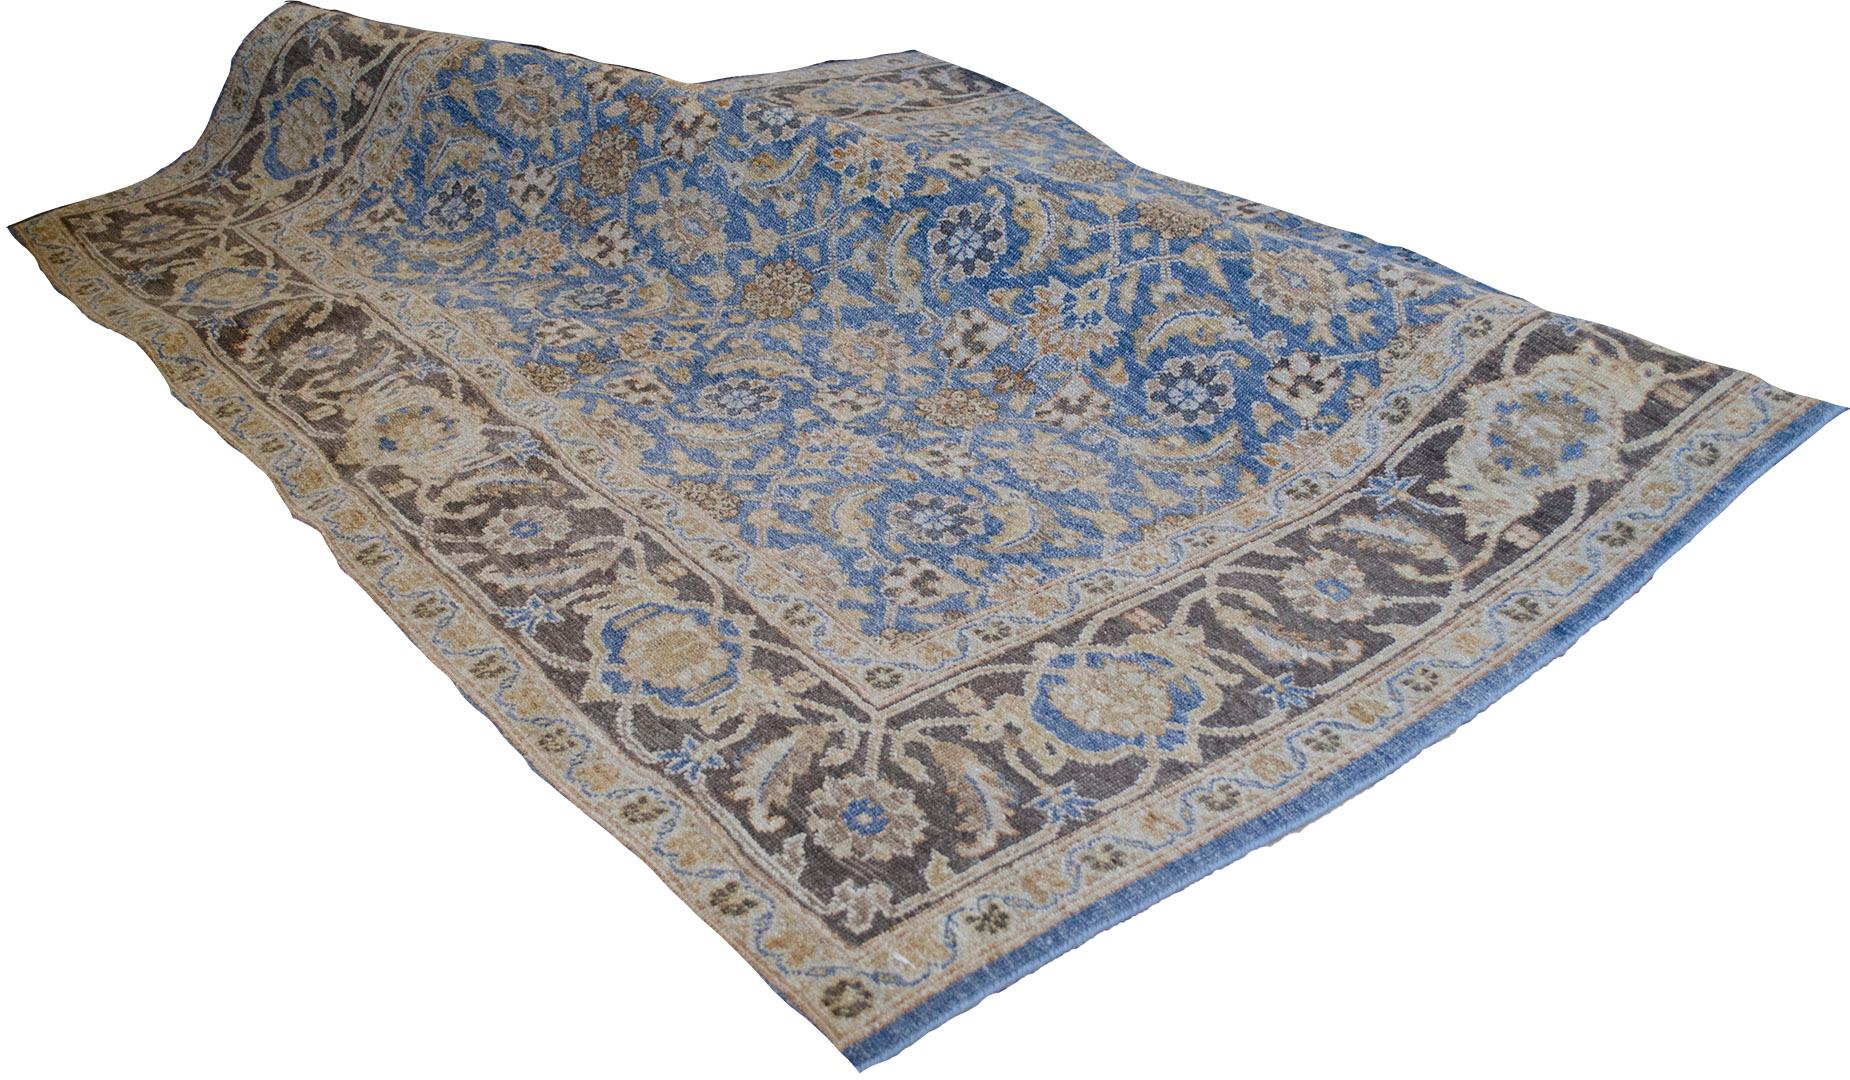 Truly one of a kind and extremely high quality Tabriz from Egypt featuring a breathtakingly decorative design and a soothing blue field color. 100% fine natural wool pile. Brand new.